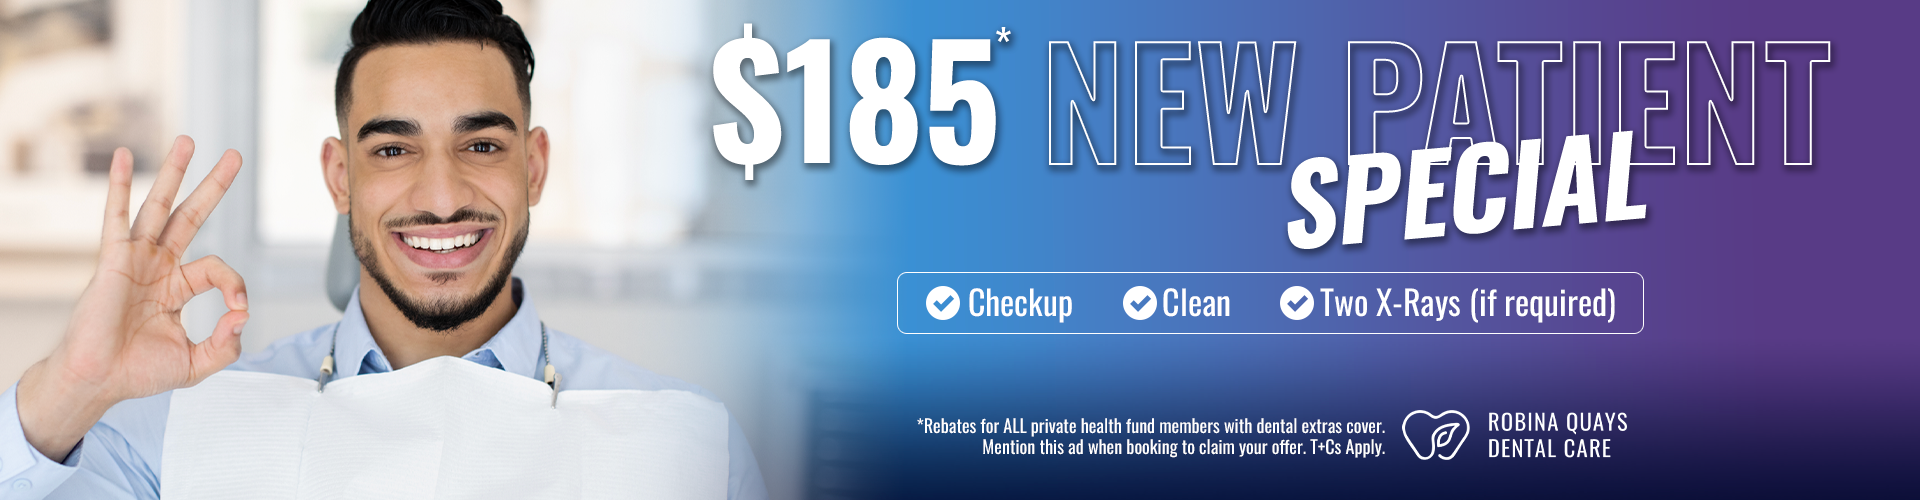 New Patient Promotion $185. Check up, Clean and 2 X-Rrays